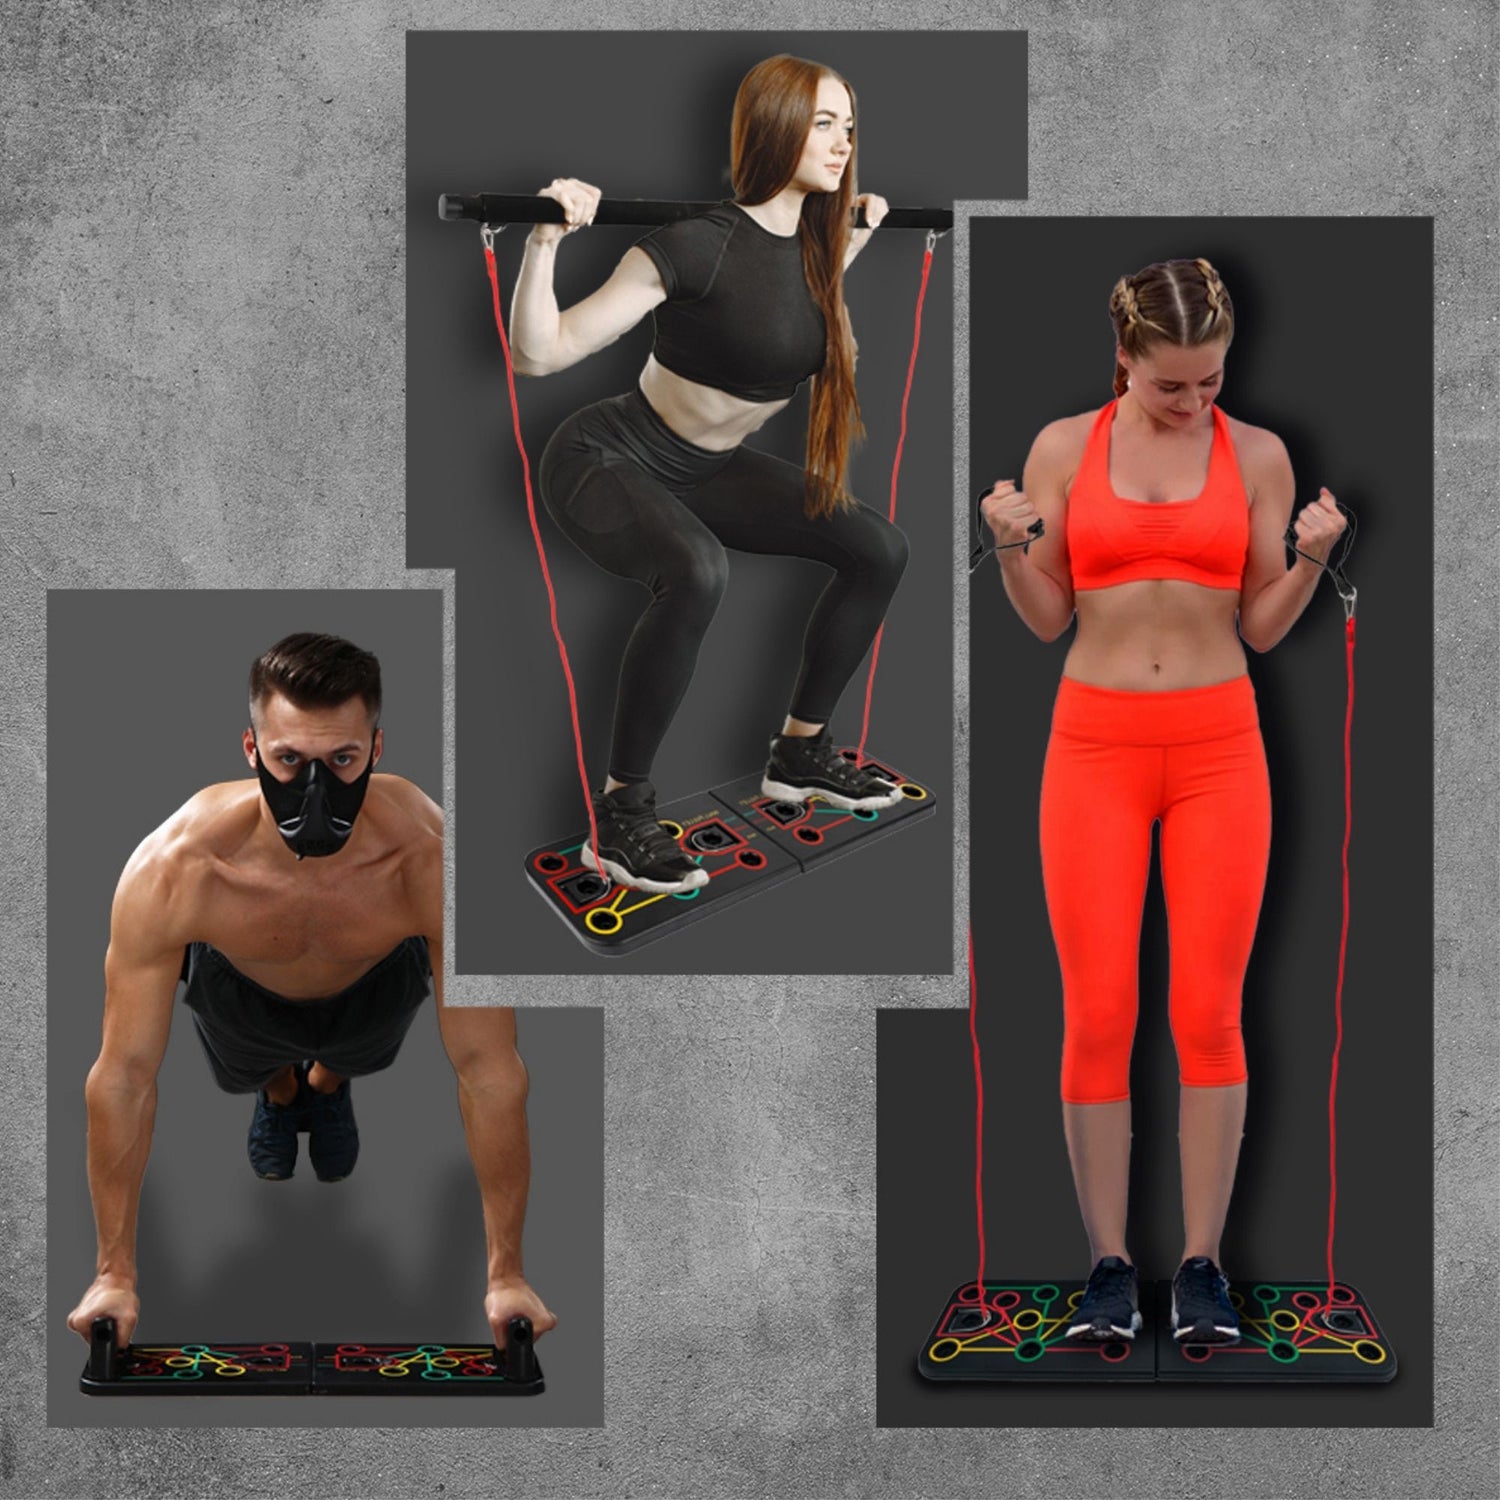 9 in 1 Push Up Workout Training Kit For Exercise